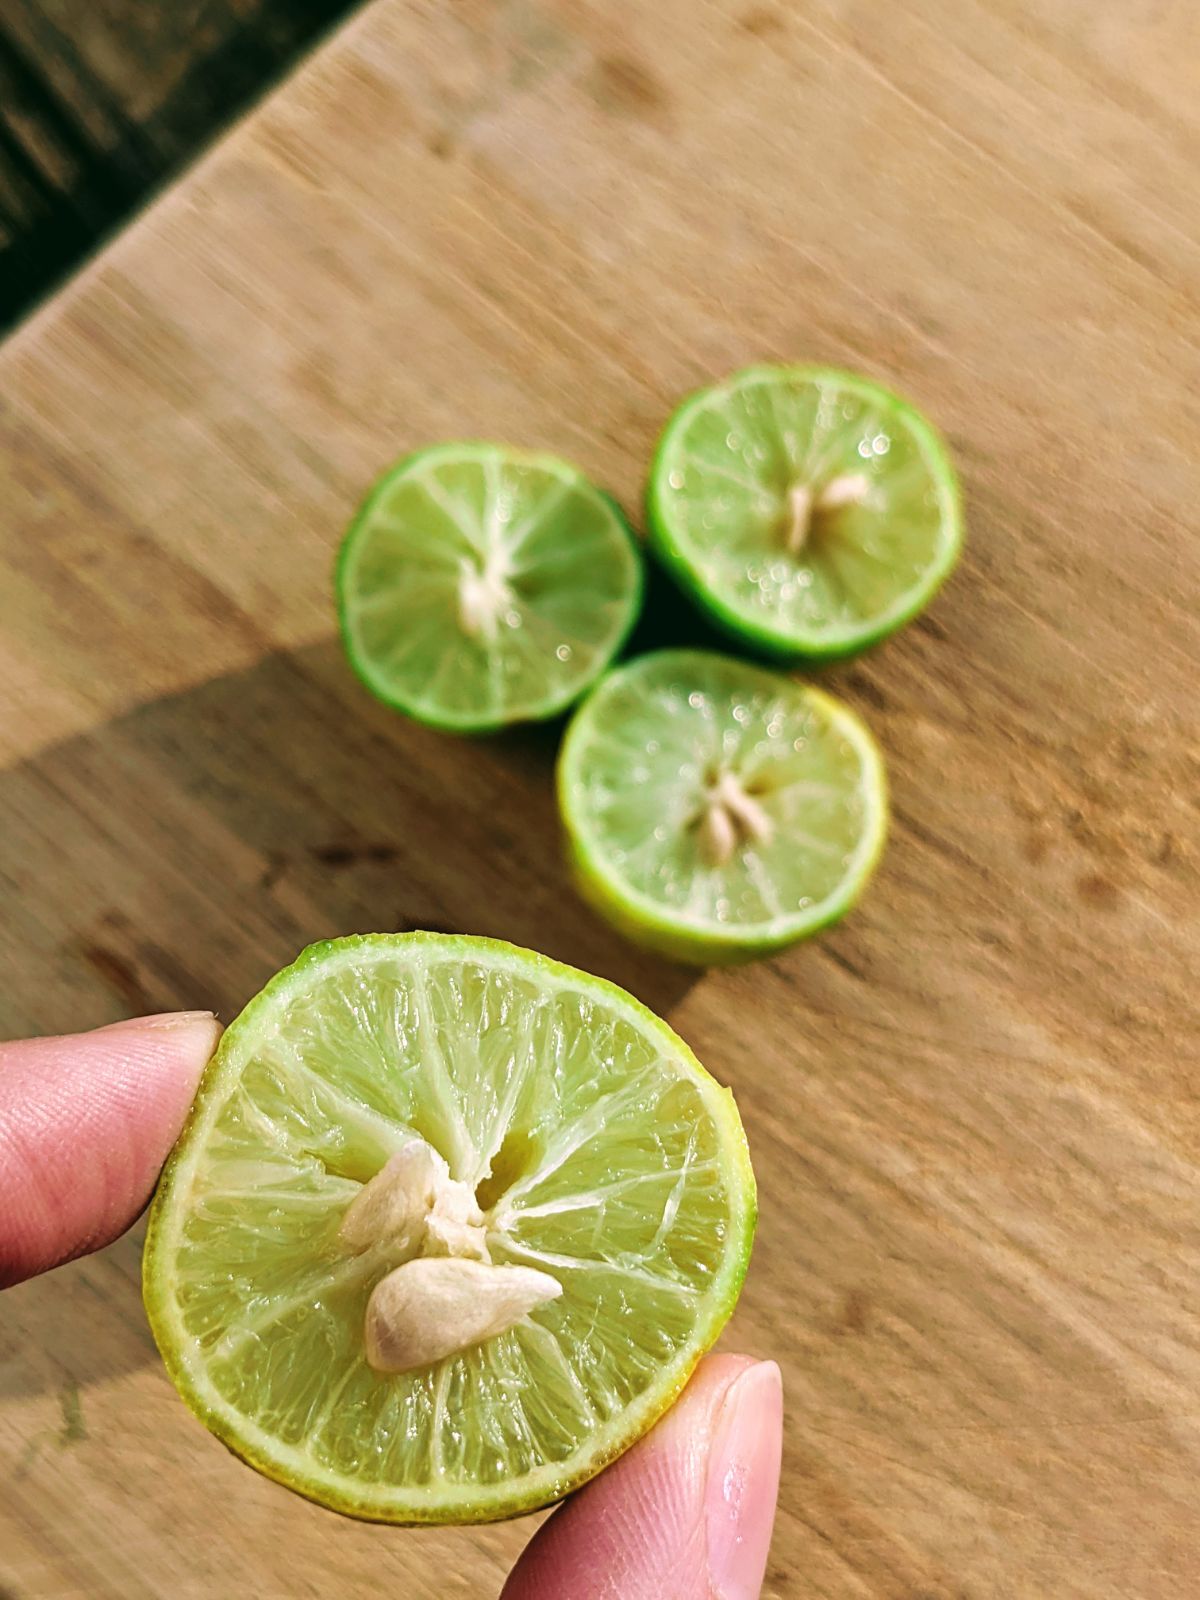 Hand holding key lime half with seeds